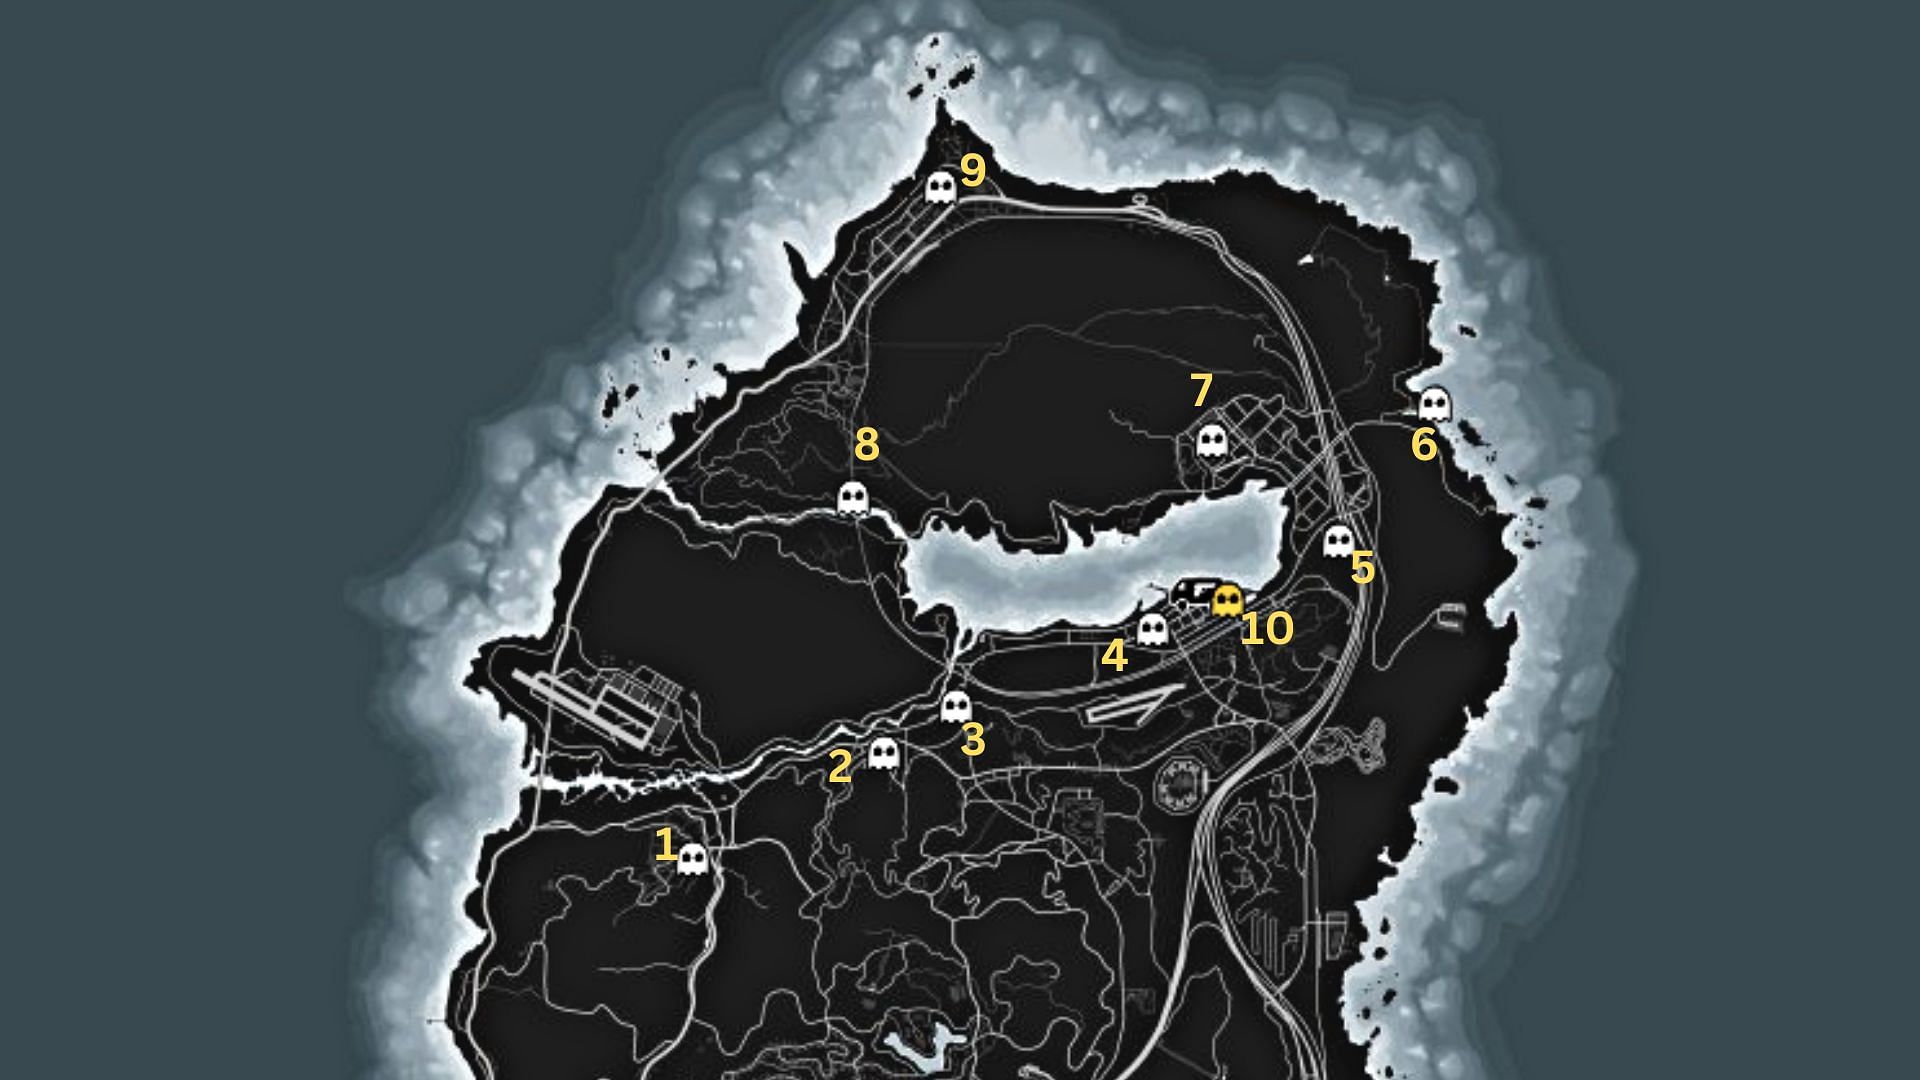 All 10 Ghost locations for the Ghosts Exposed event (Image via gtalens.com)